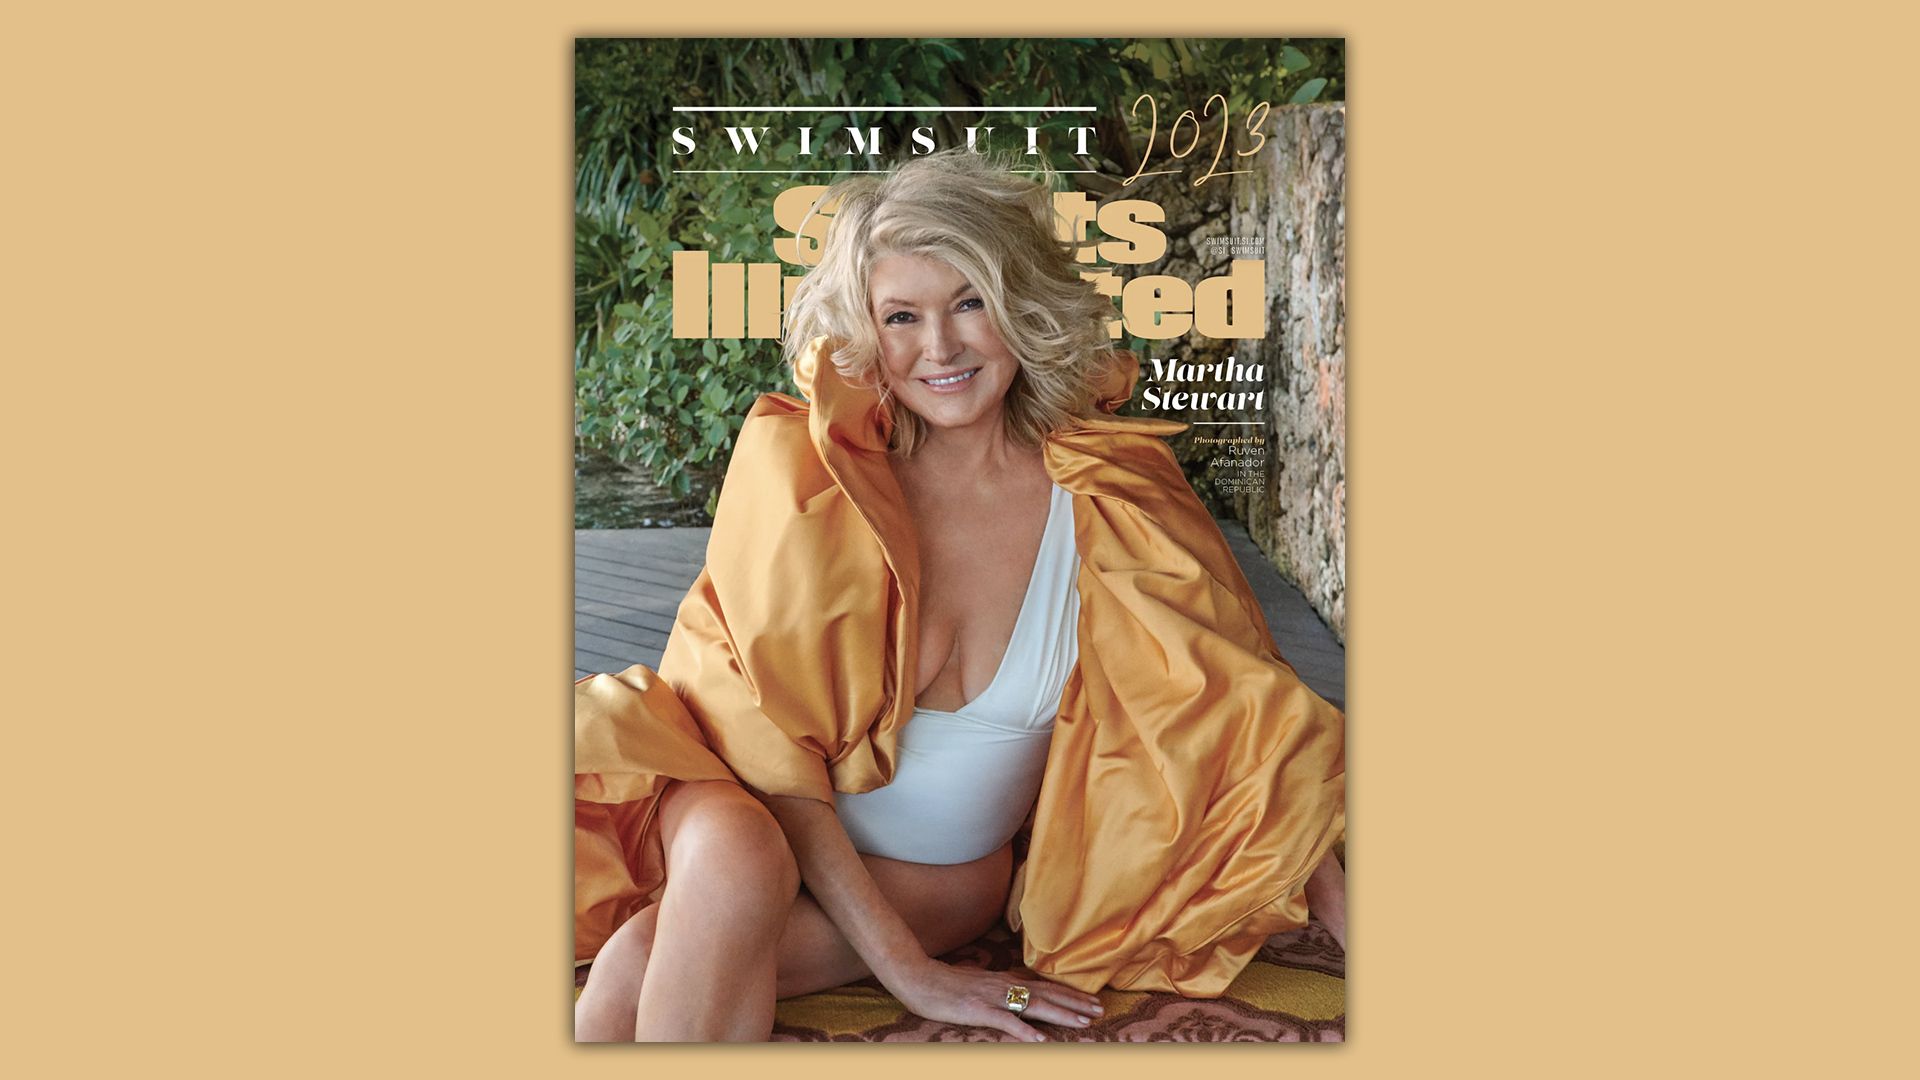 Martha Stewart on cover of Sports Illustrated